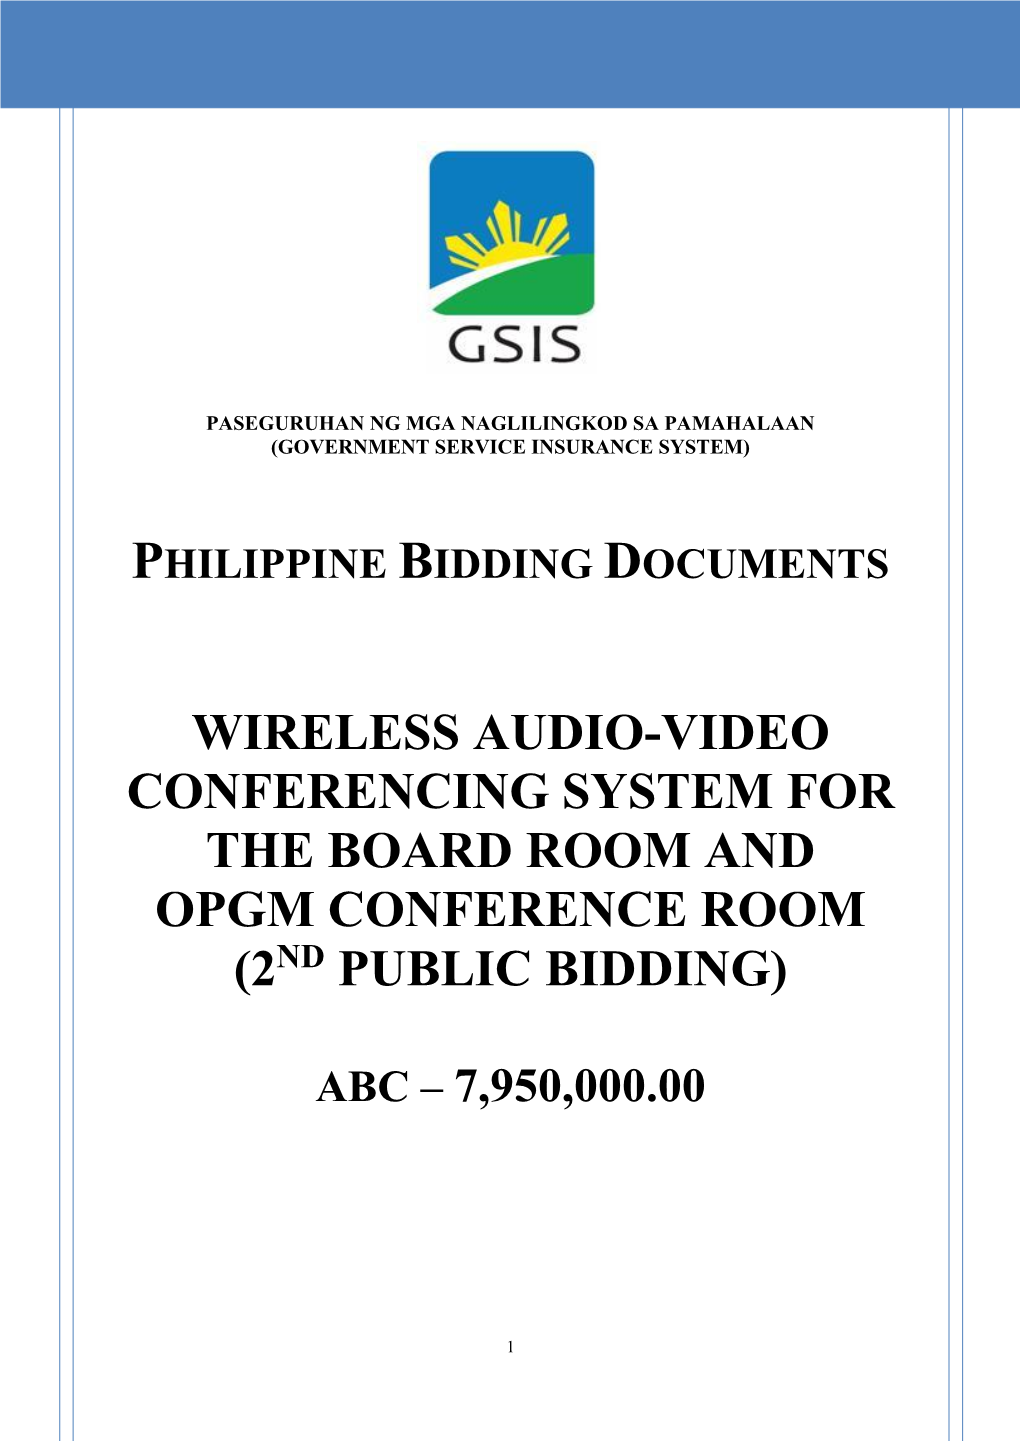 Wireless Audio-Video Conferencing System for the Board Room and Opgm Conference Room Nd (2 Public Bidding)